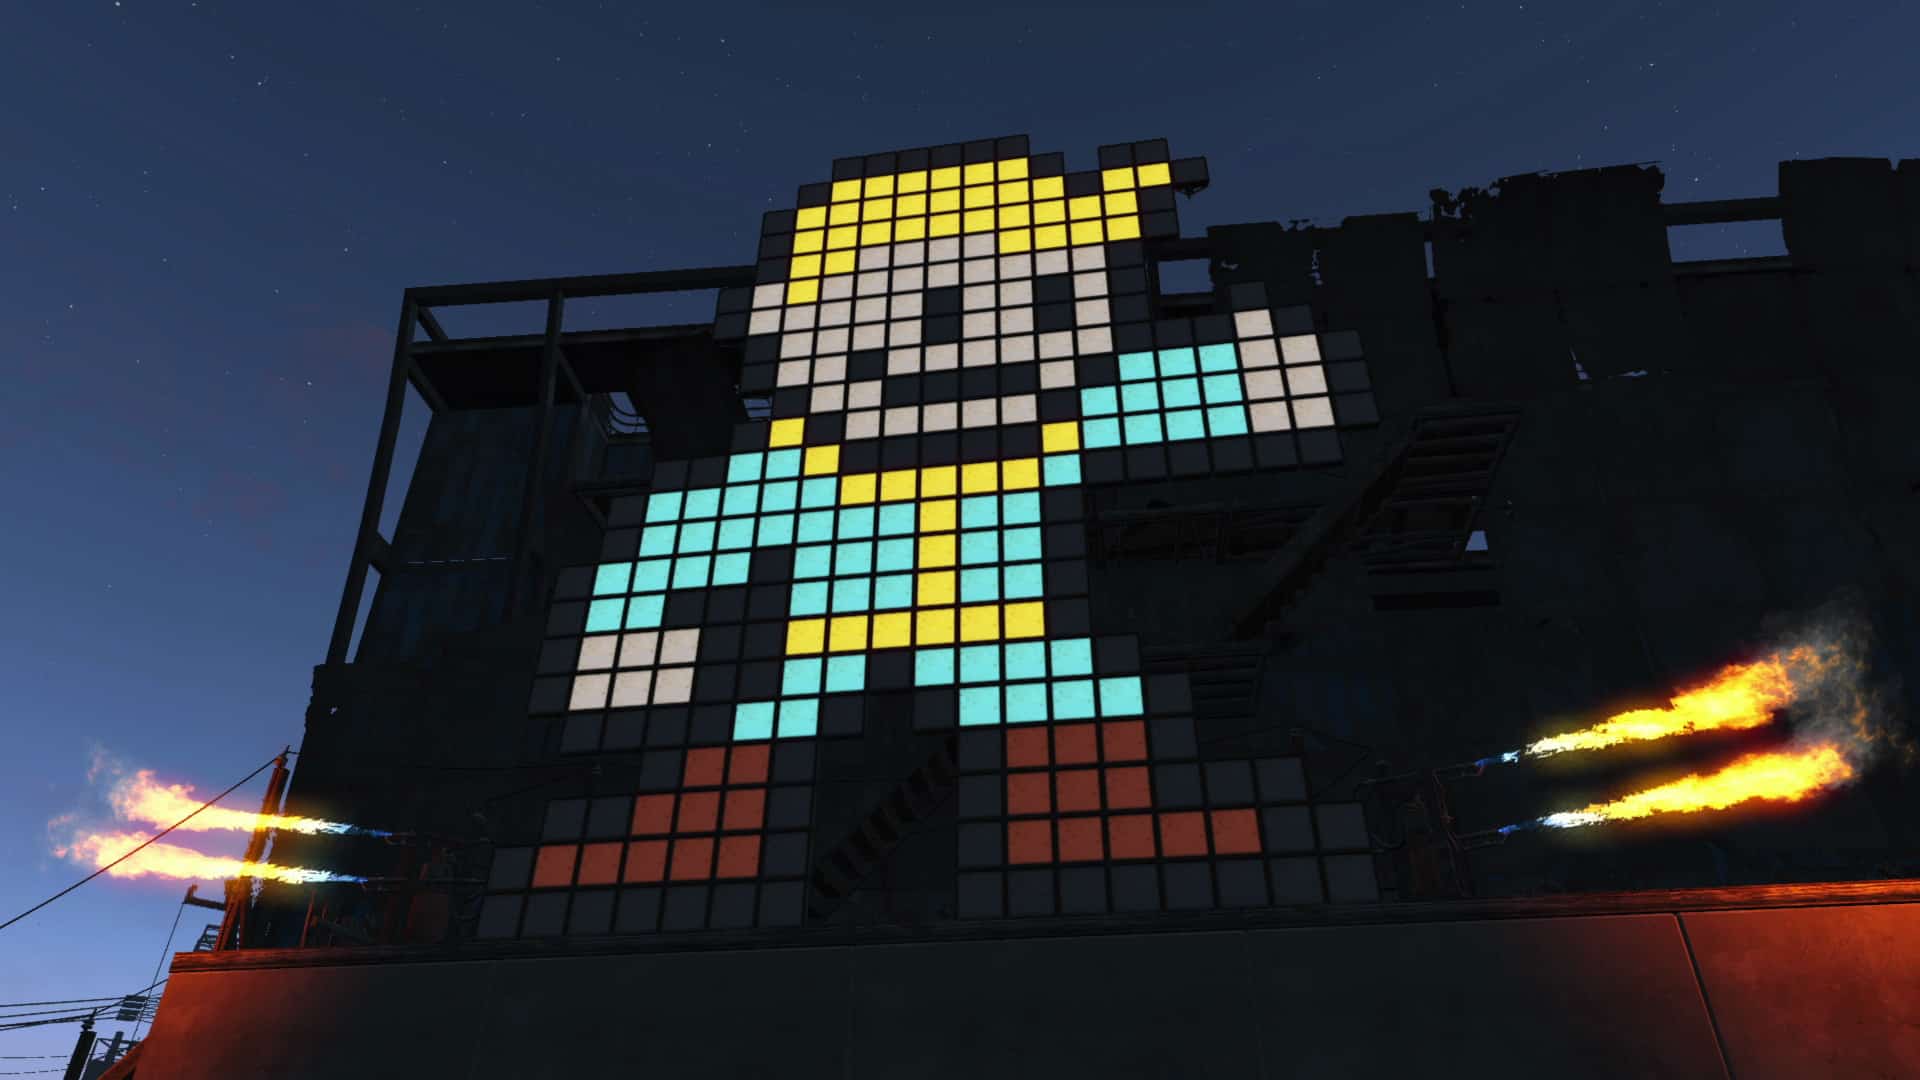 Fallout 4's Vault Boy mascot depicted by in-game colored screens